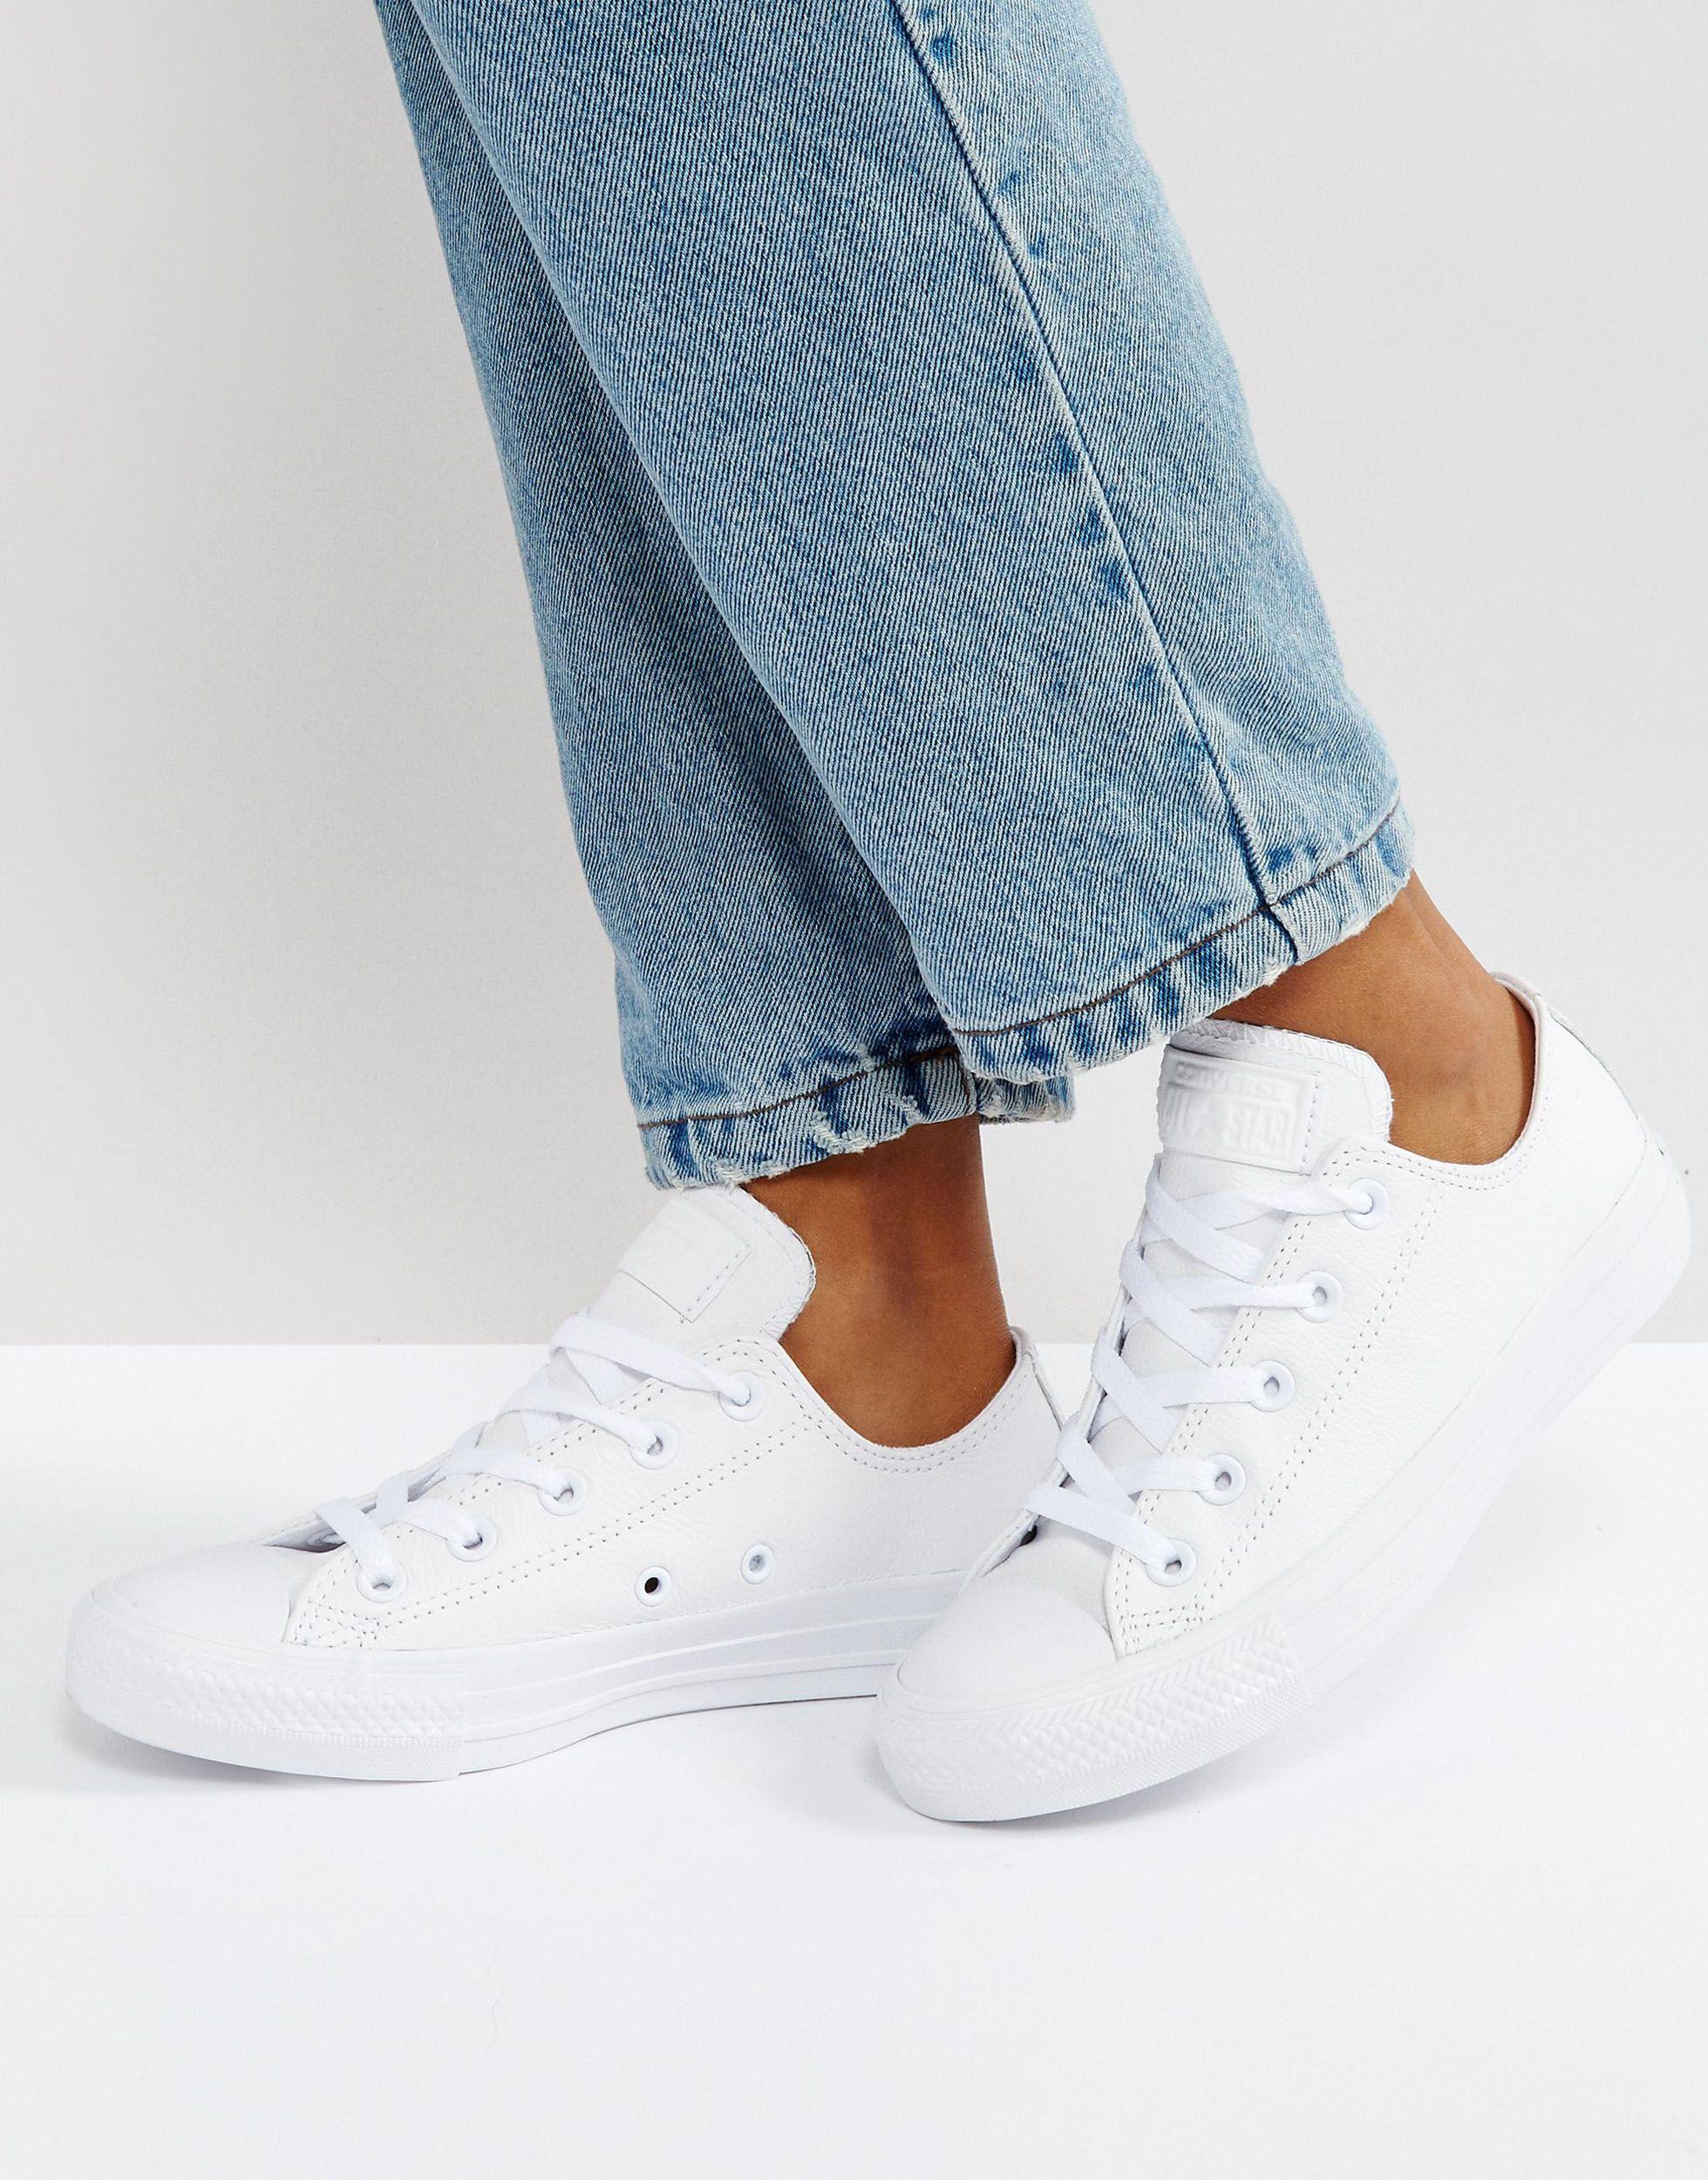 Converse Chuck Taylor Ox Leather White Monochrome Sneakers - Lyst